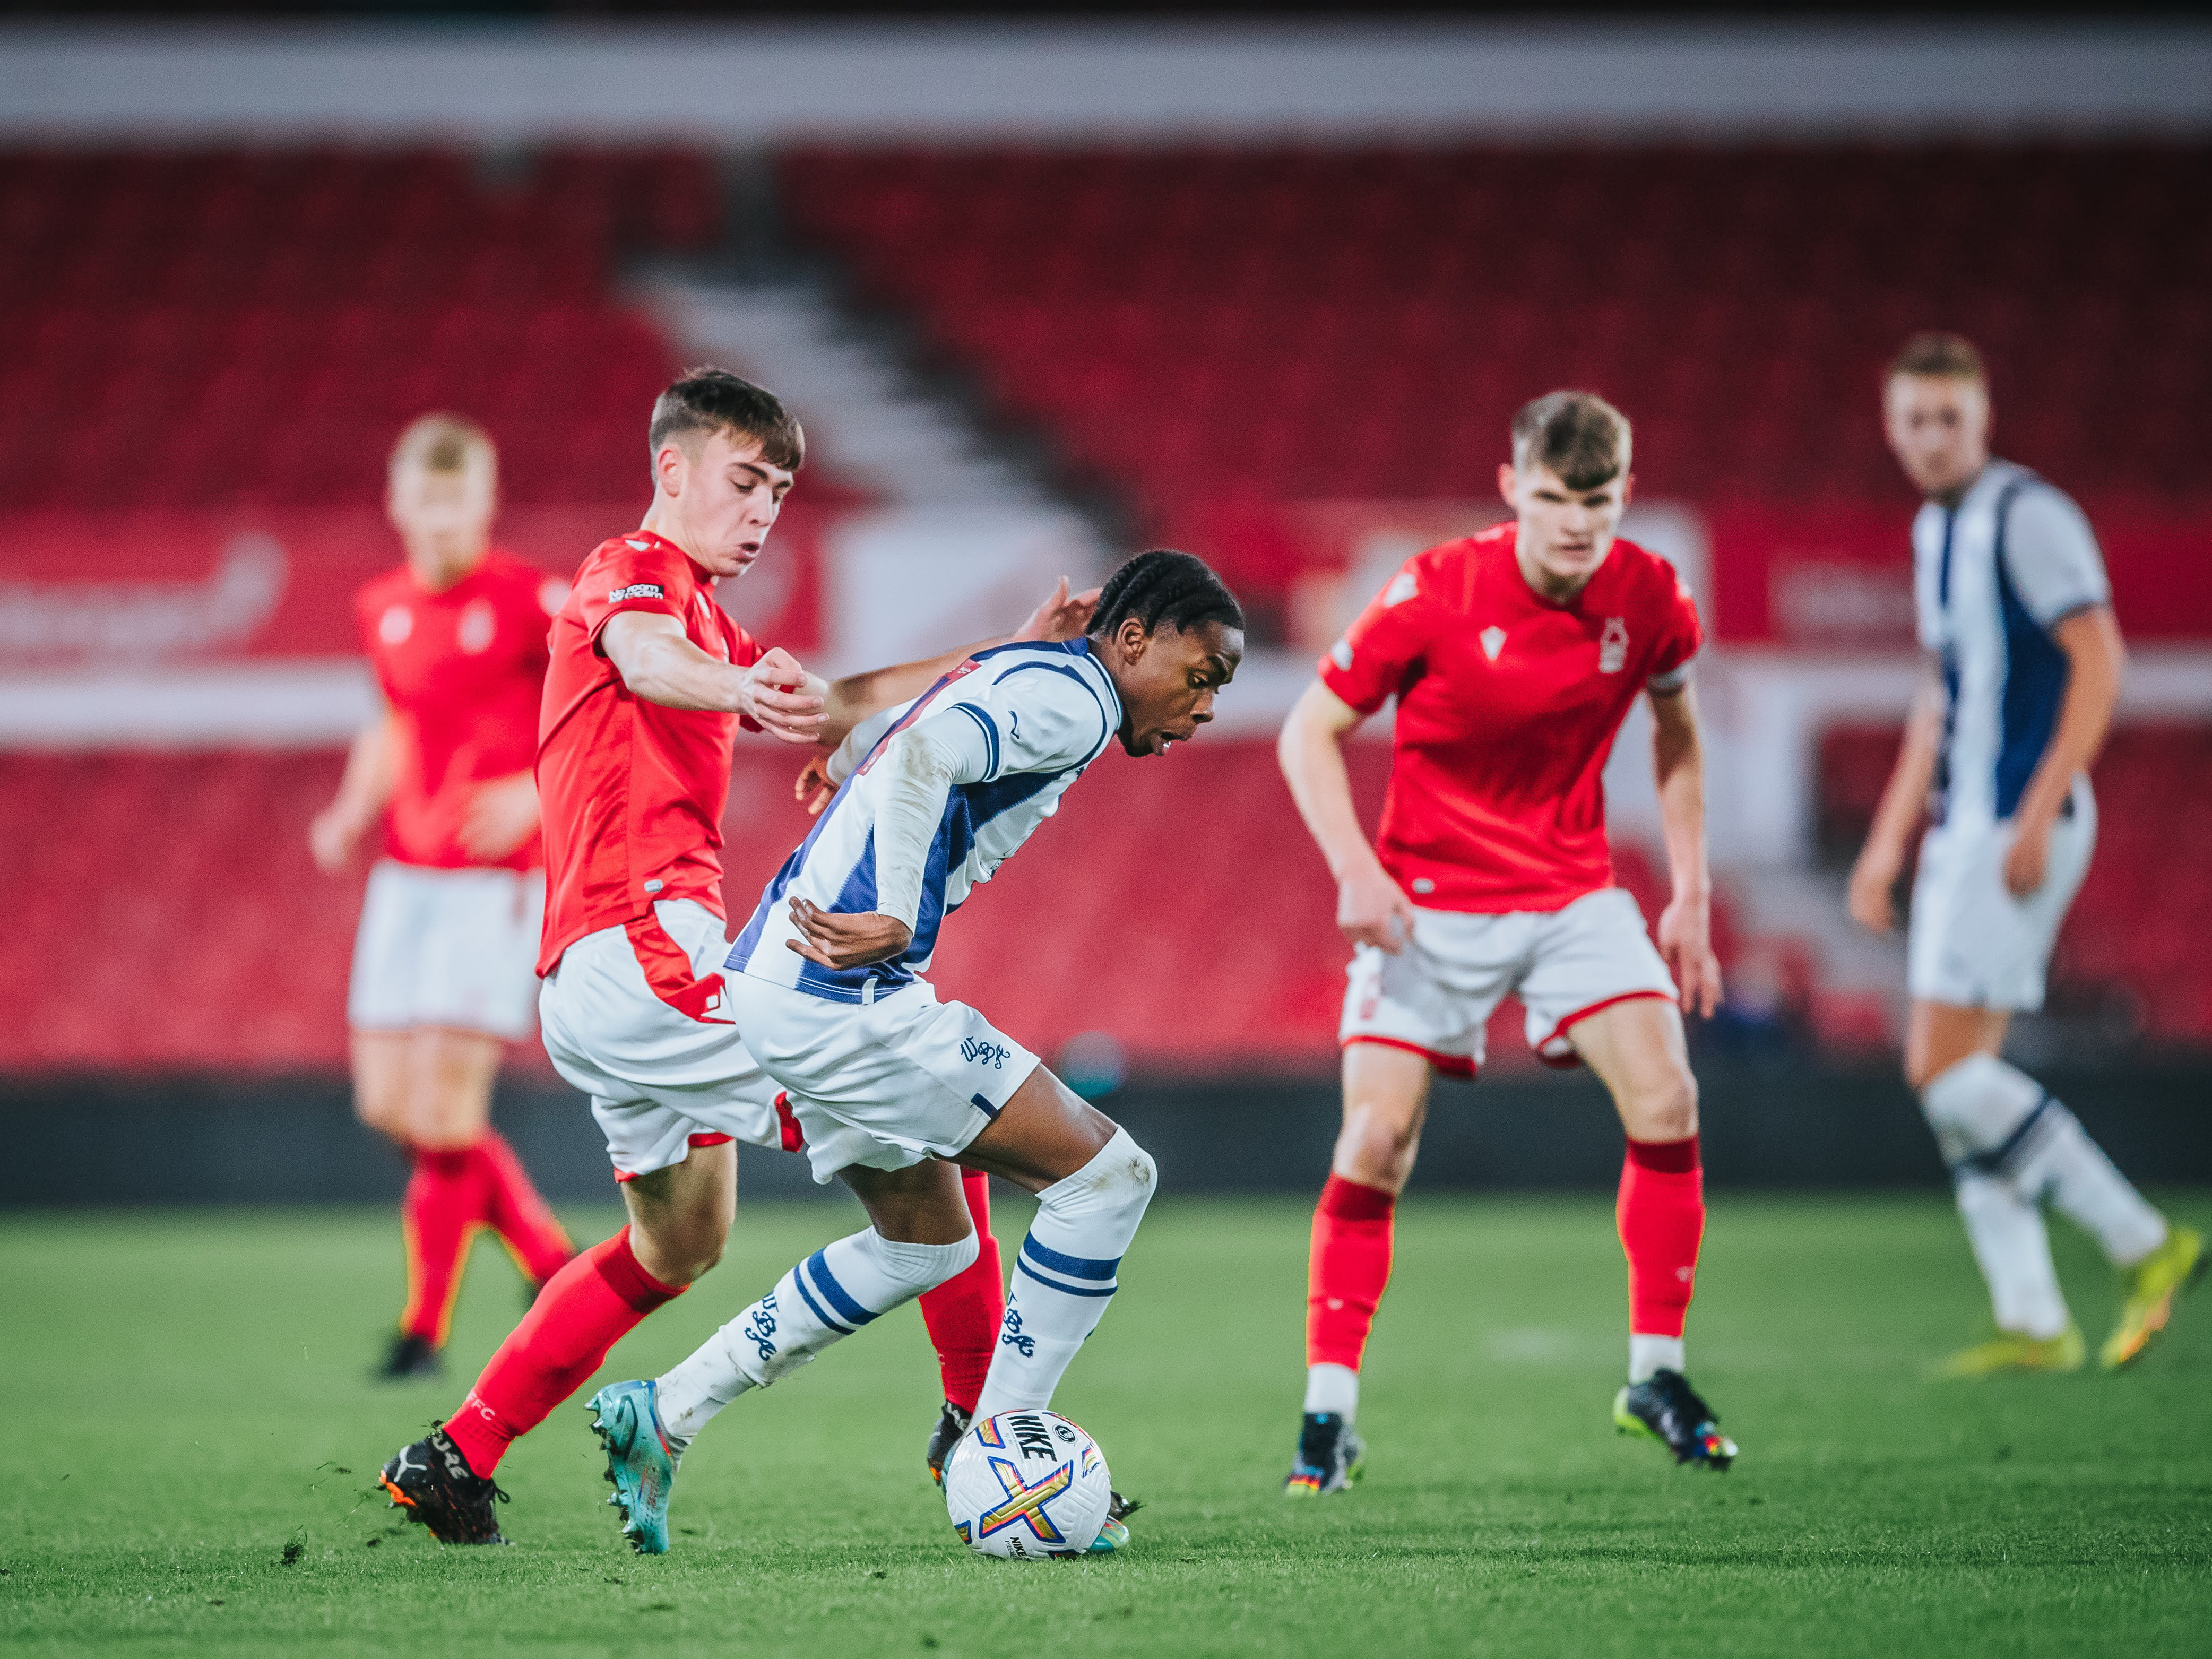 Akeel Higgins holds onto the ball for Albion against Nottingham Forest in the FA Youth Cup